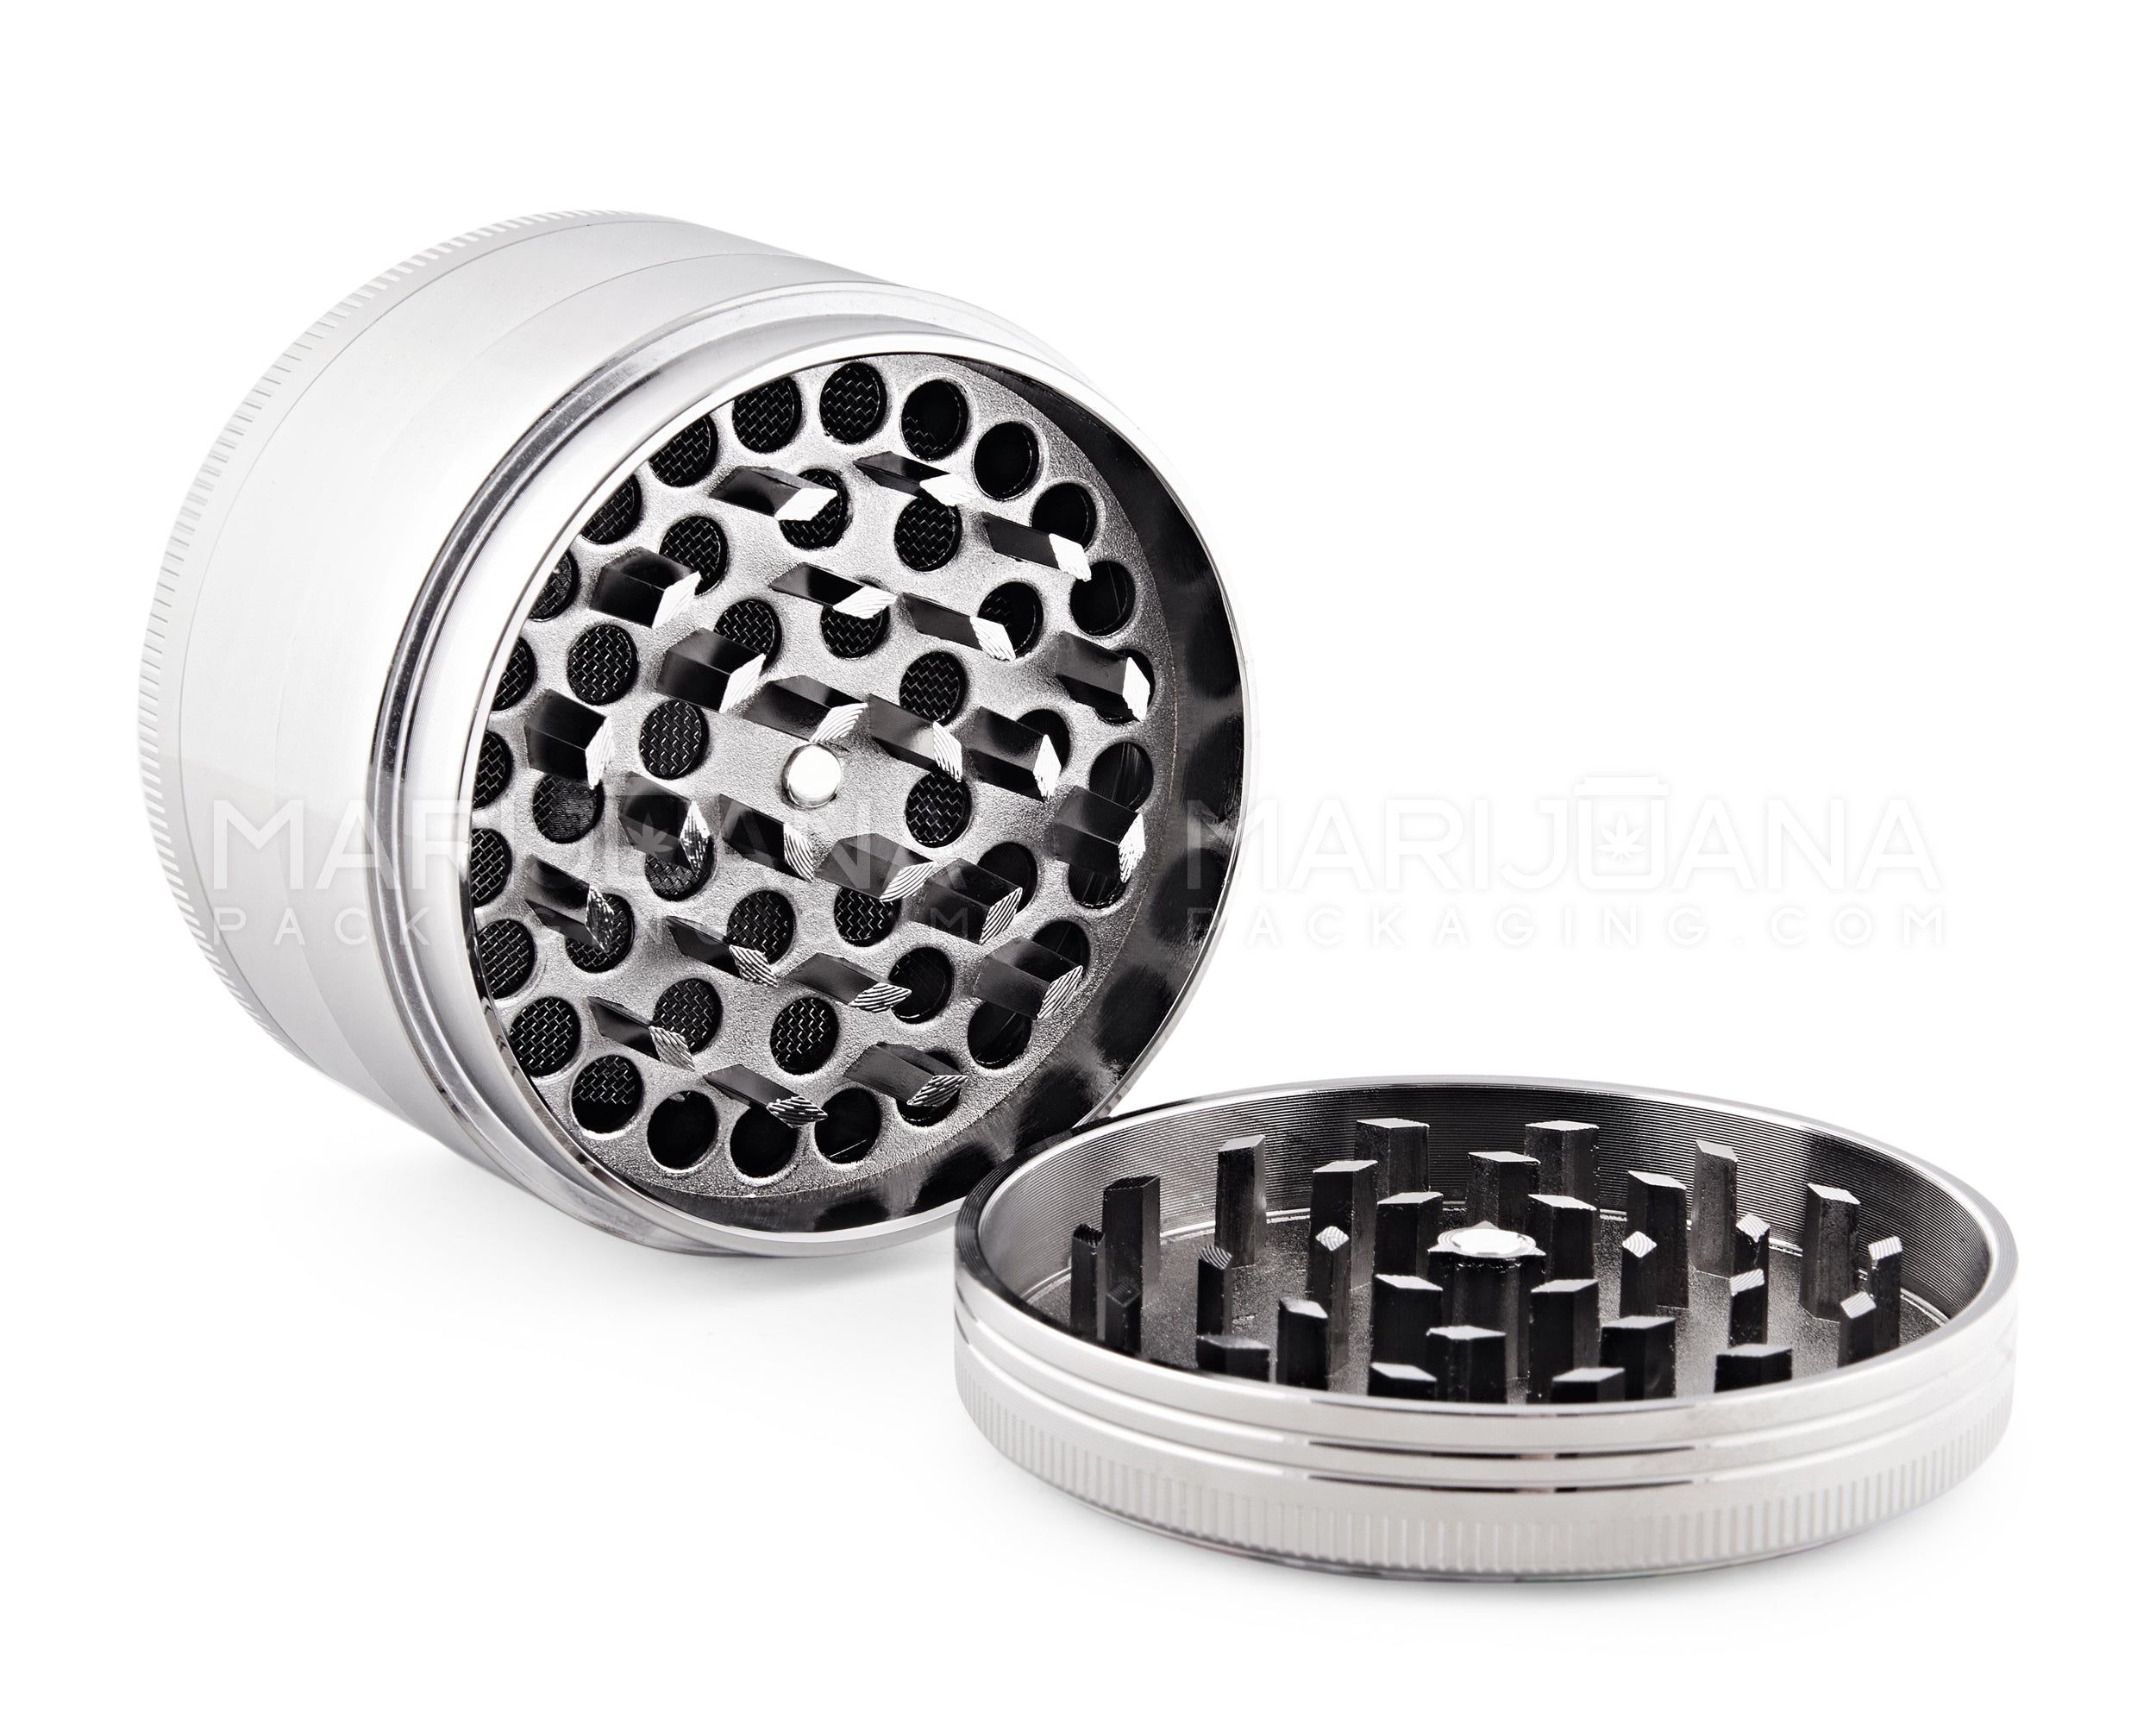 Weed of Fortune Magnetic Metal Grinder w/ Catcher | 4 Piece - 63mm - Silver